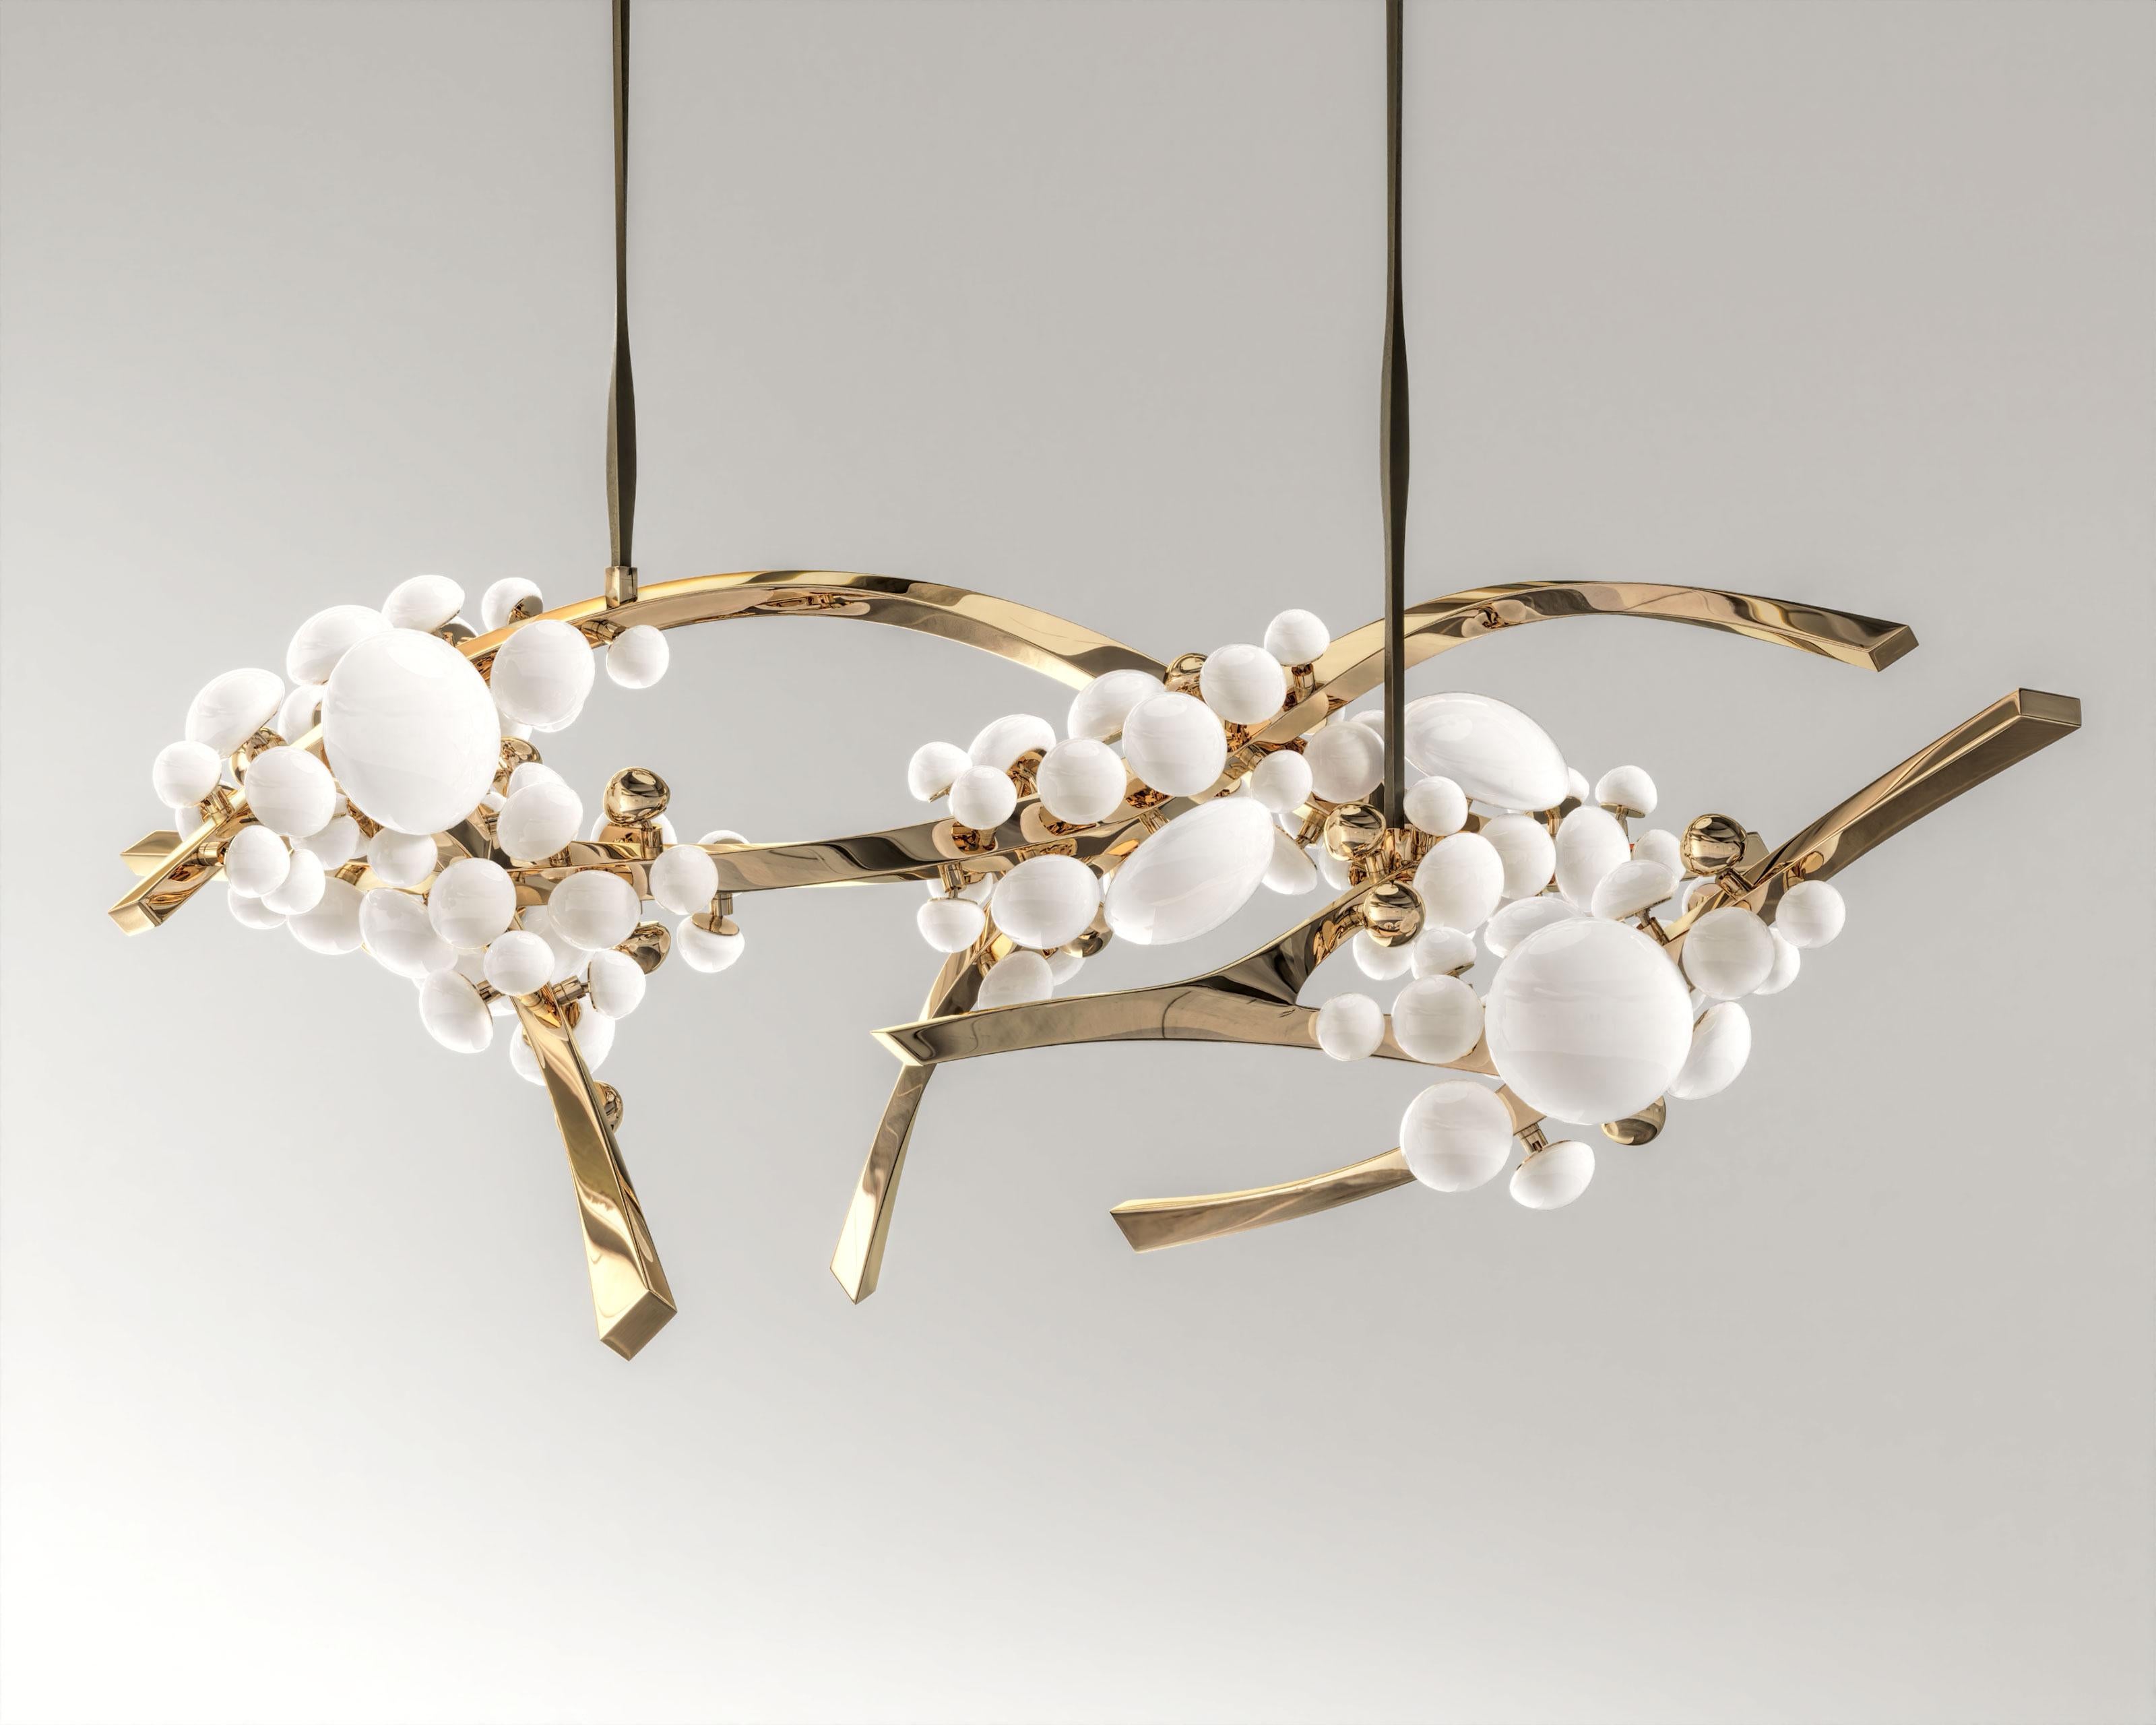 Intıma Horizontal Polished Bronze Chandelier
The “Intima” Luxury Handmade Chandelier is an exquisite work of art that seamlessly merges the elegance of neural networks. This chandelier serves as the focal point of any space, exuding sophistication